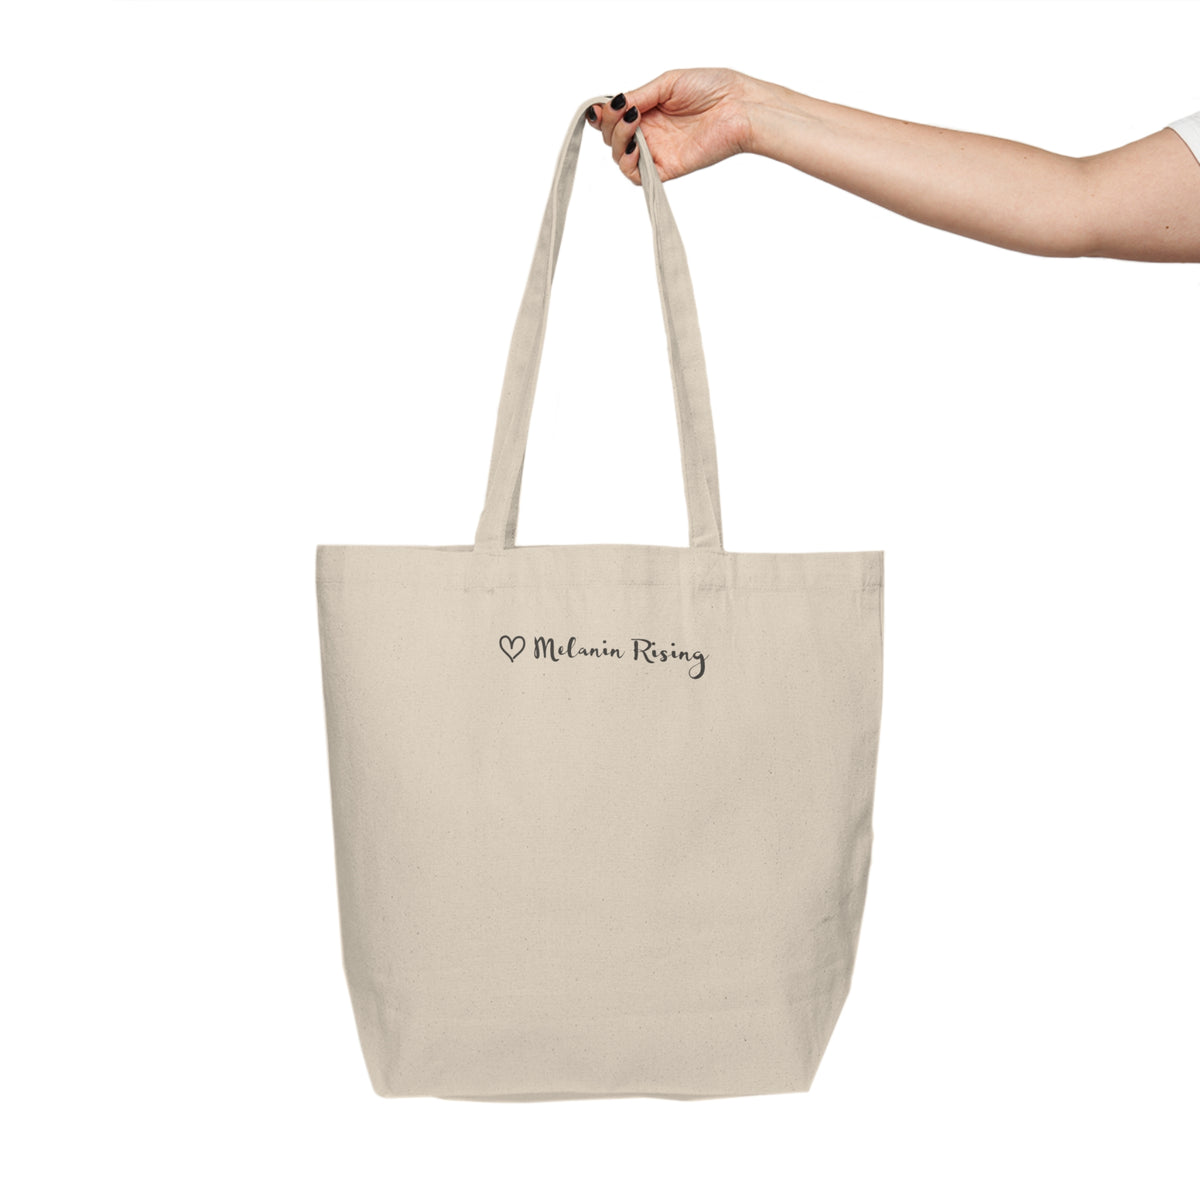 The Revolution Will Not Be Colonized - Canvas Shopping Tote